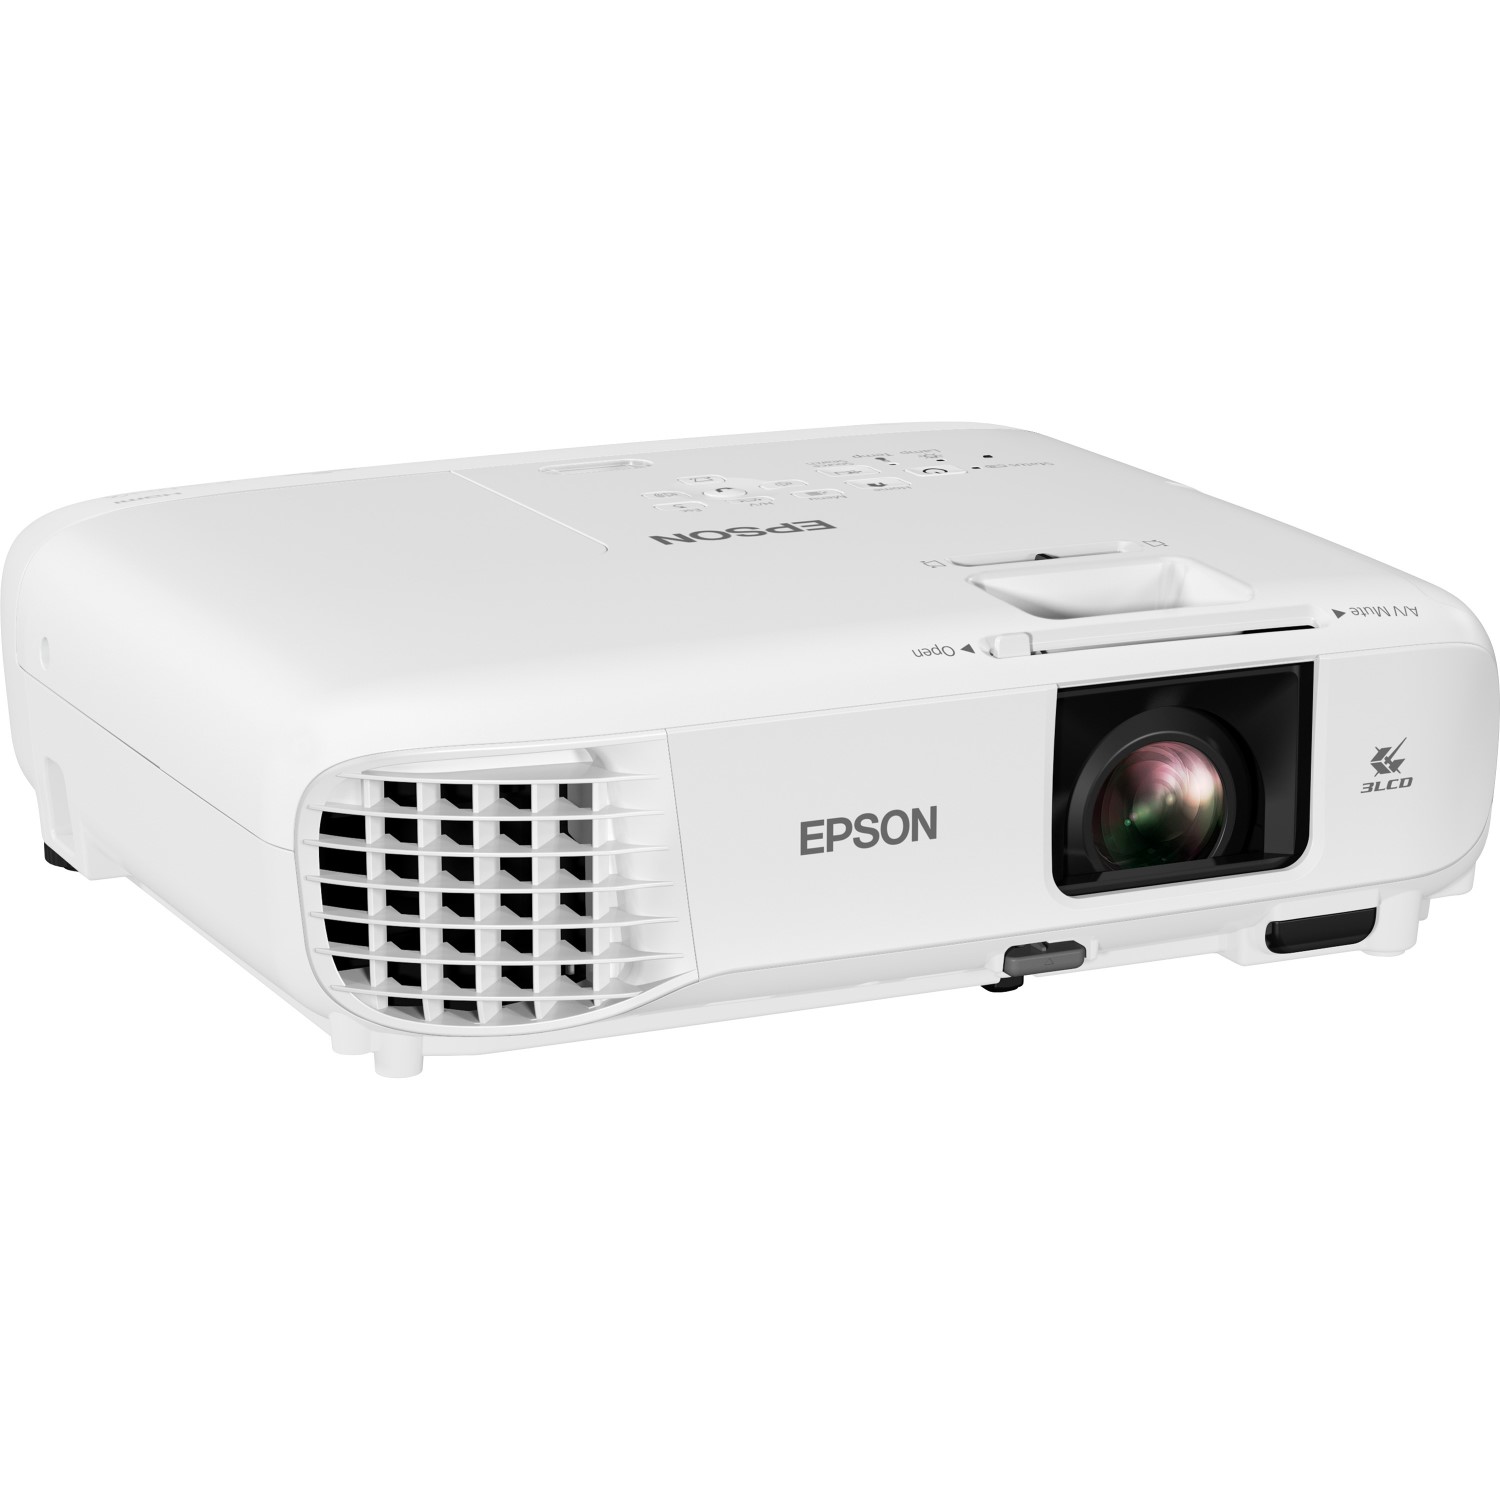 Epson PowerLite X49 3LCD XGA Classroom Projector with HDMI - image 2 of 2